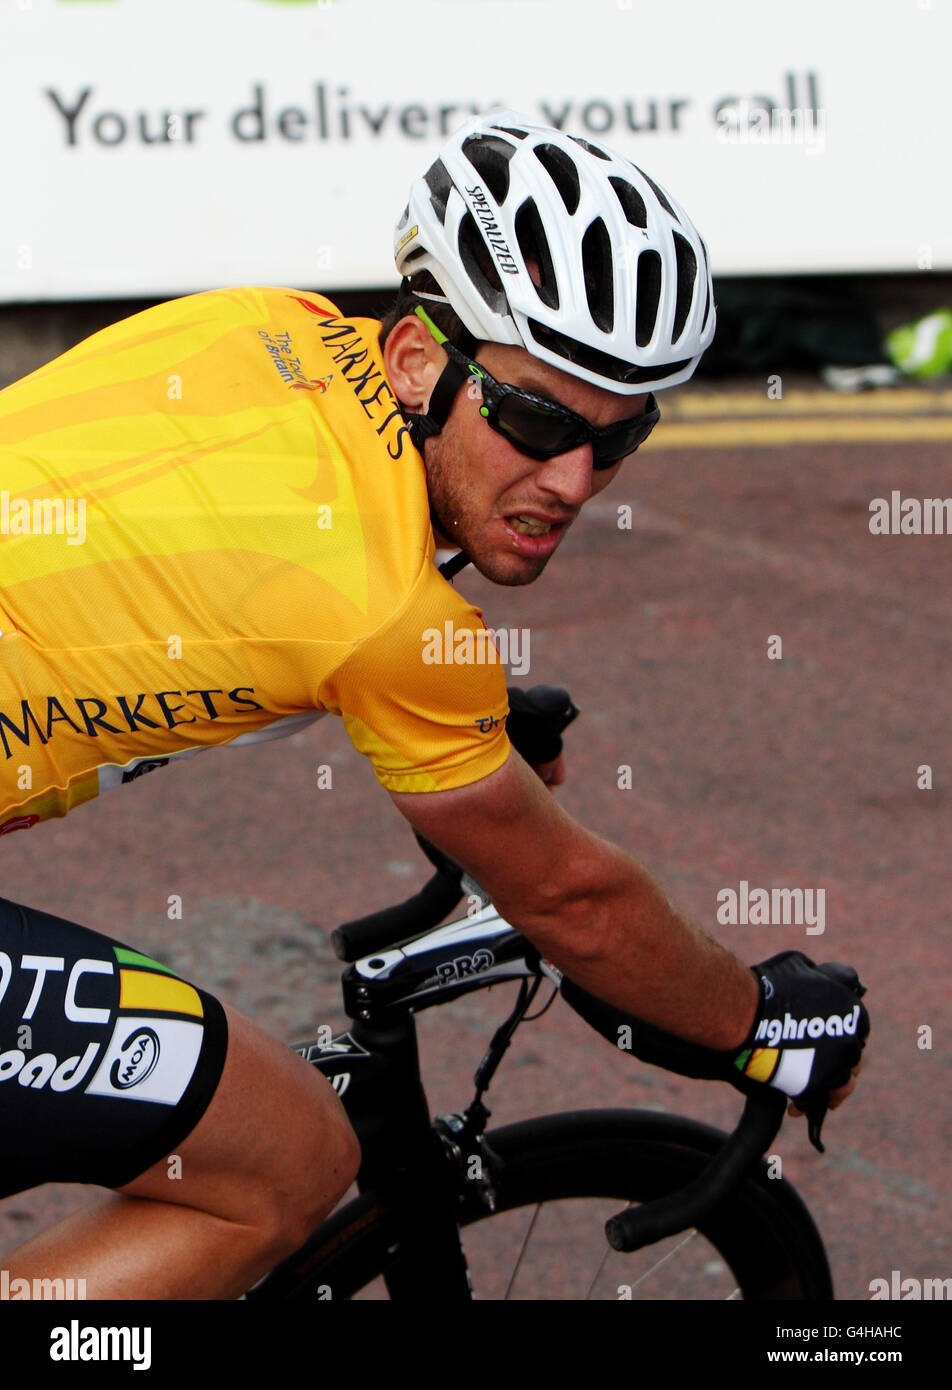 HTC Highroad's Mark Cavendish after finishing 5th during Stage Three of the Tour of Britain, Stoke on Trent, Staffordshire. Stock Photo